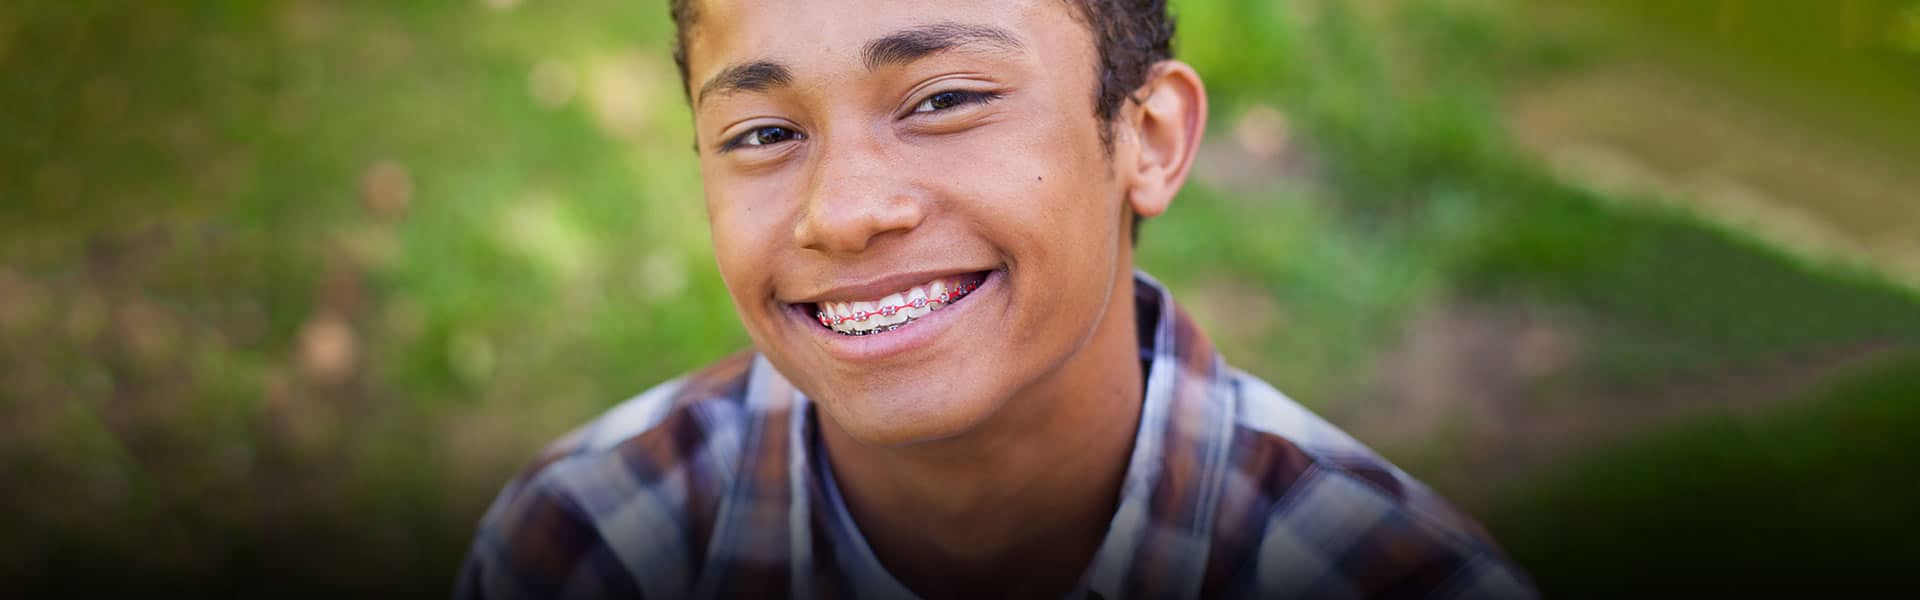 Teen Boys The Silver Spring Orthodontist Silver Spring and Olney MD